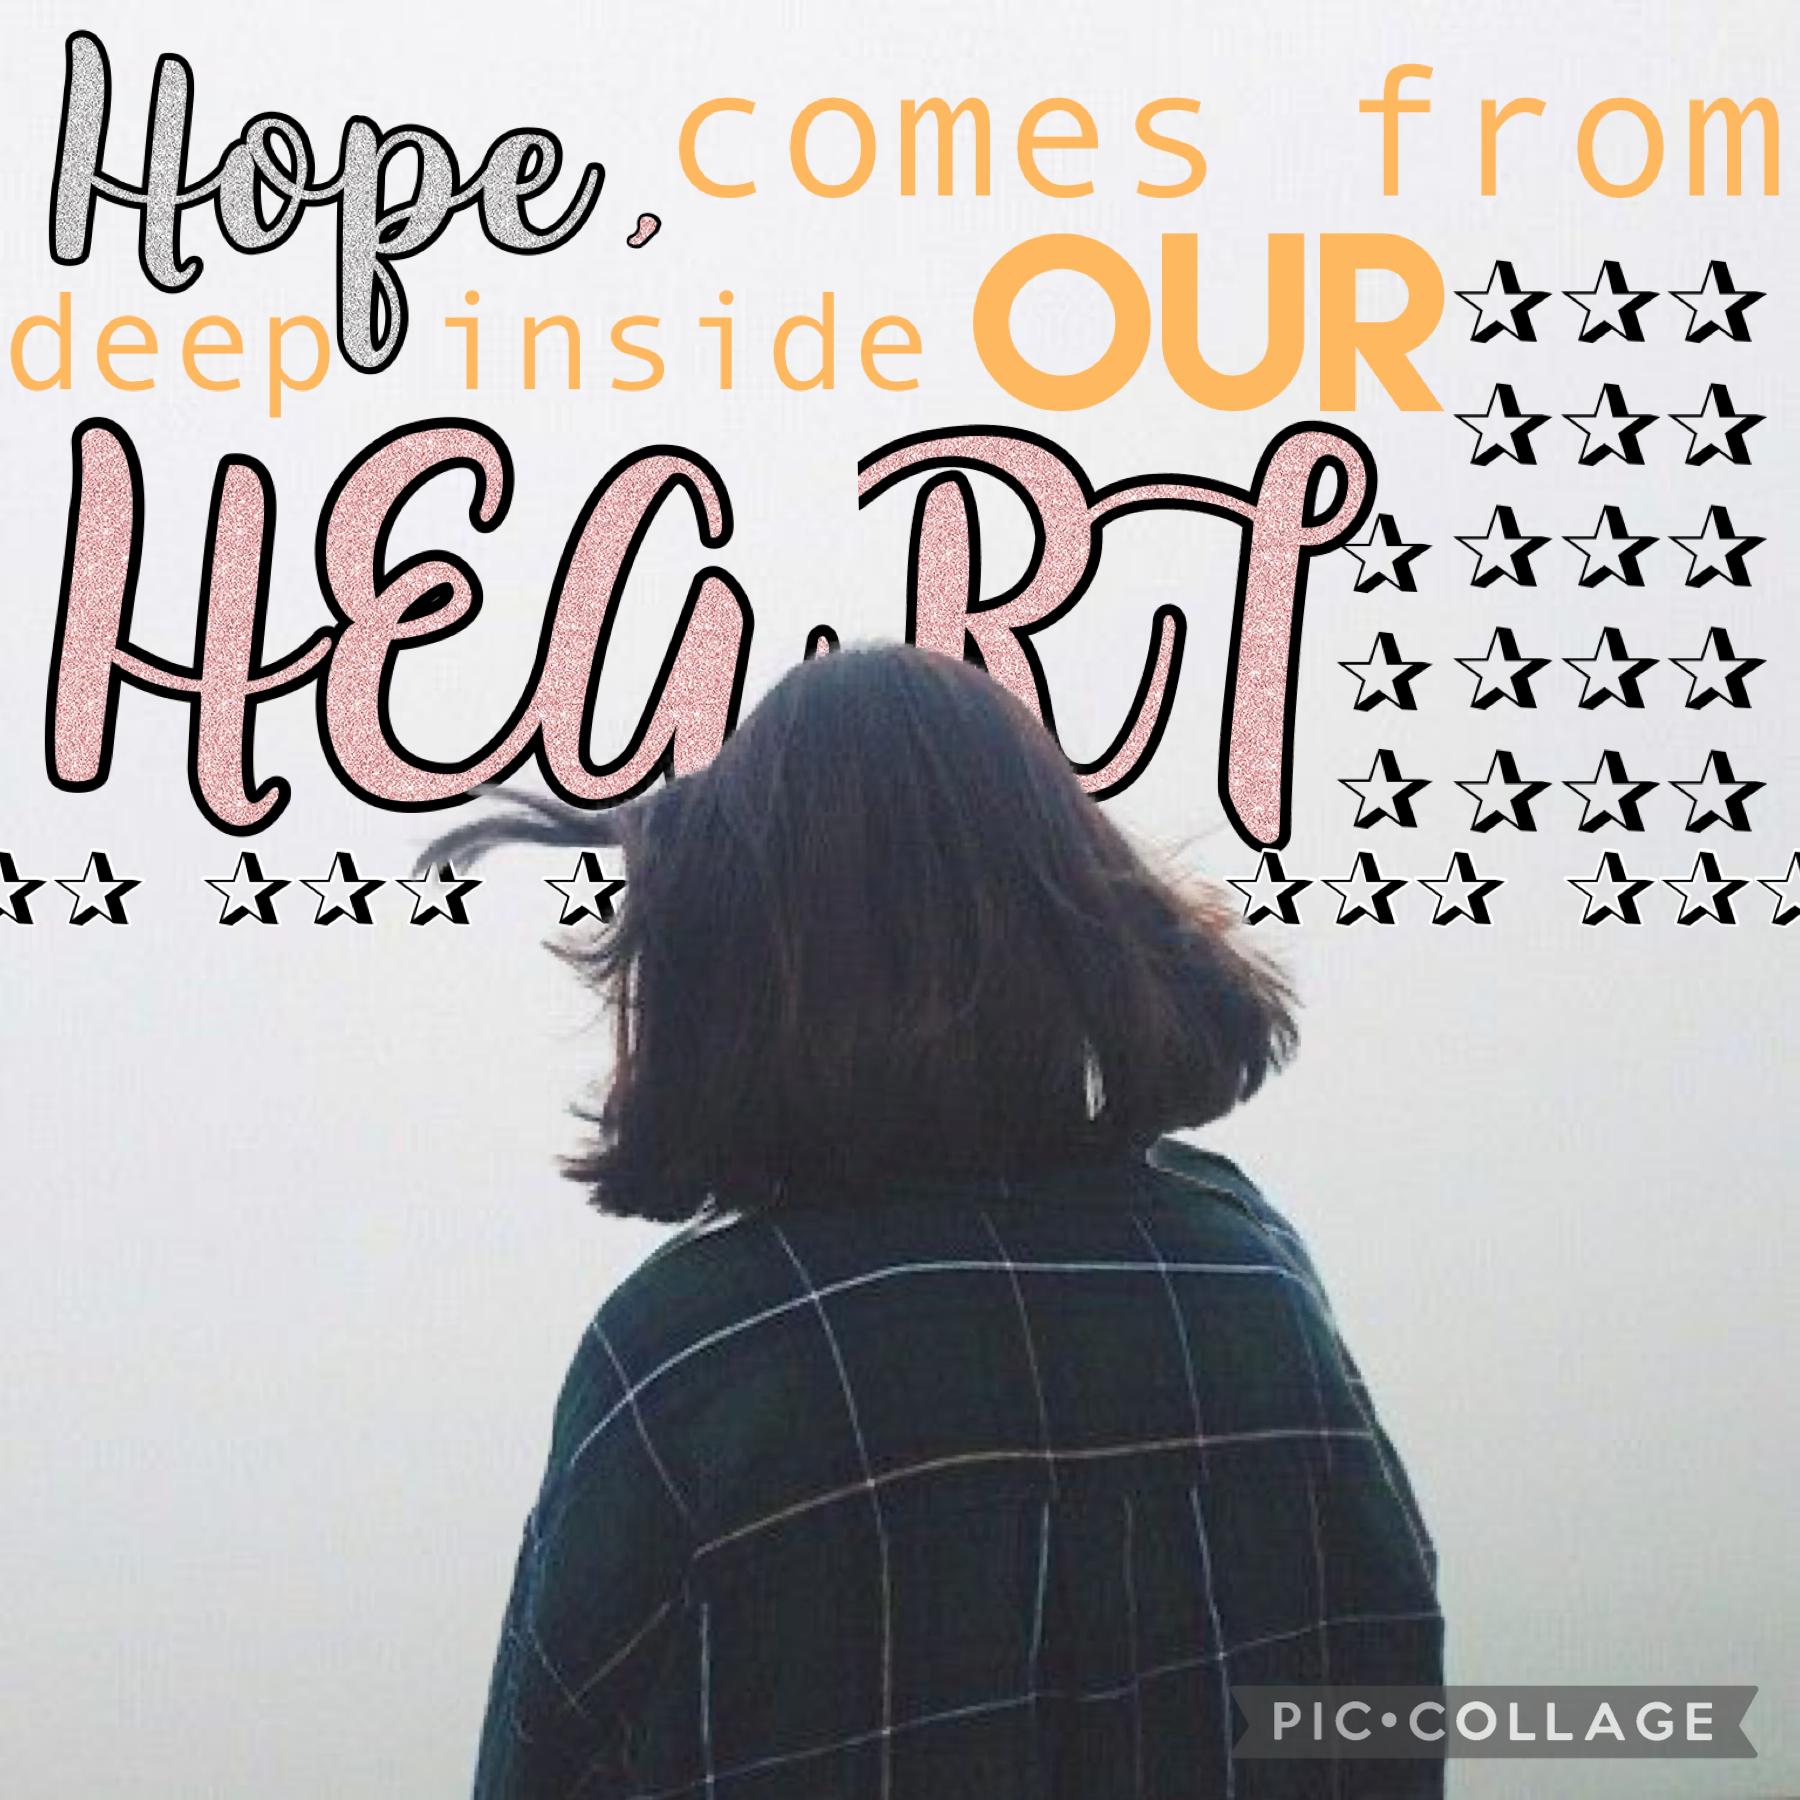 Tap /hope/
I tried! I made this so when I look at it I can remembered that I have hope on not dying!